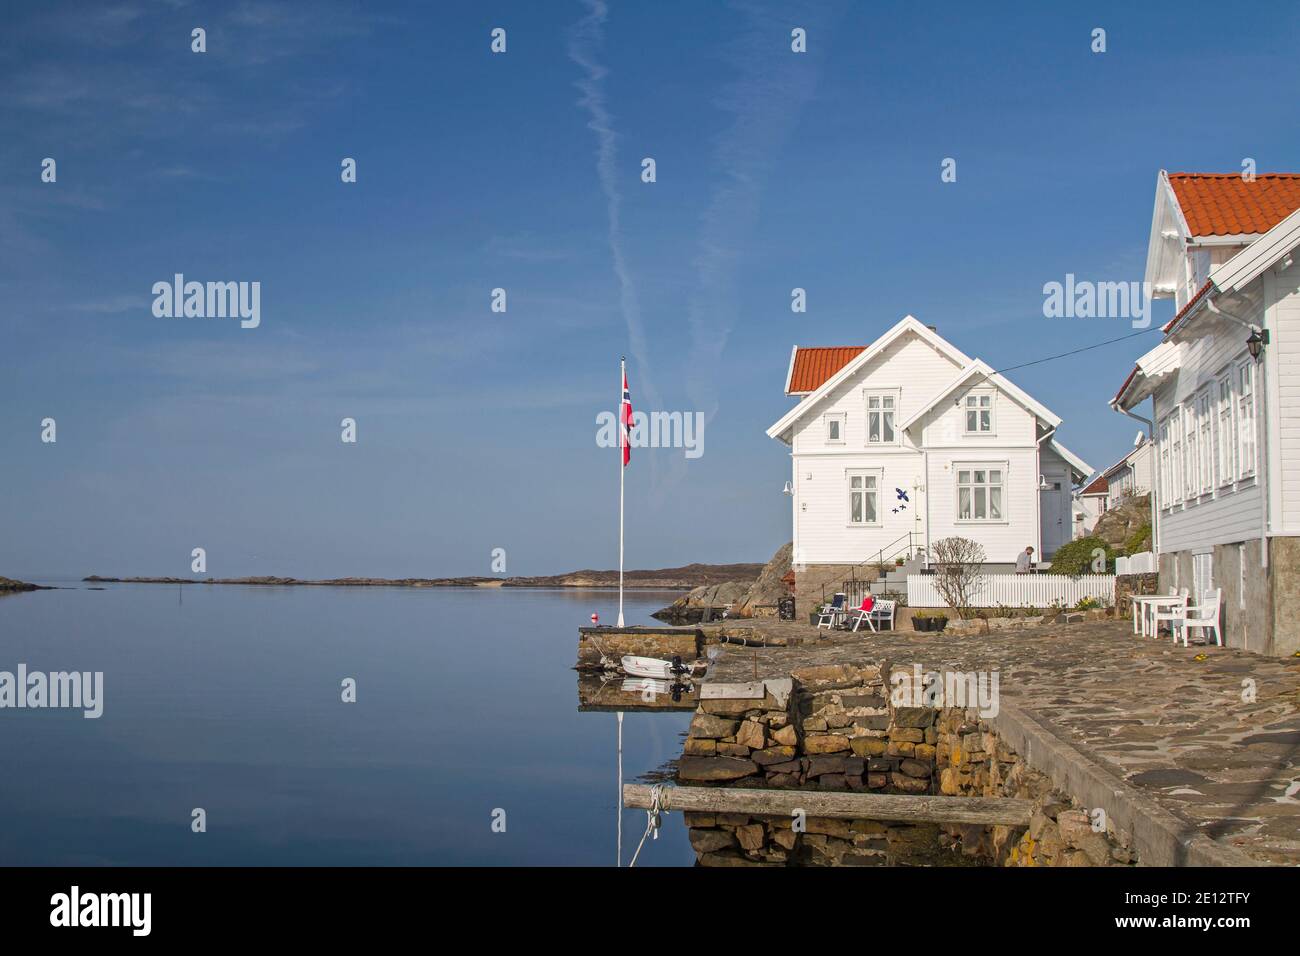 Loshavn - The Small Idyllic Village With Its White Wooden Houses Is Always Worth A Visit Stock Photo